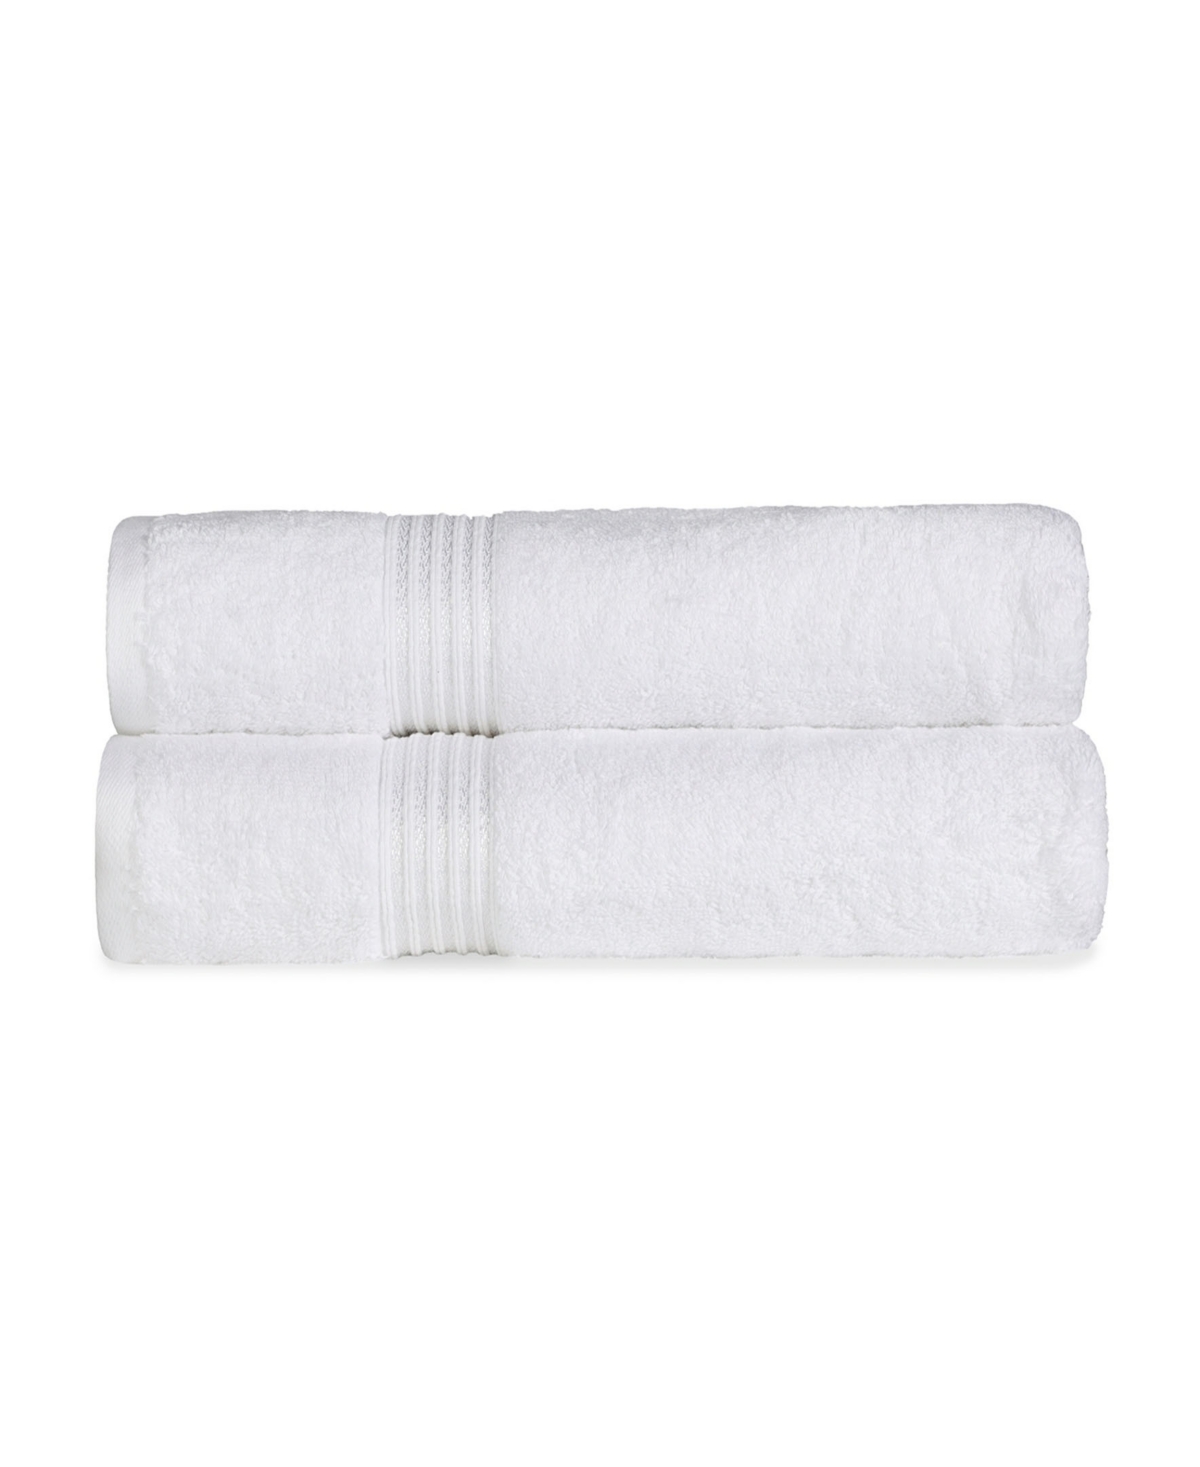 Superior Solid Quick Drying Absorbent 2 Piece Egyptian Cotton Bath Sheet Towel Set Bedding In White